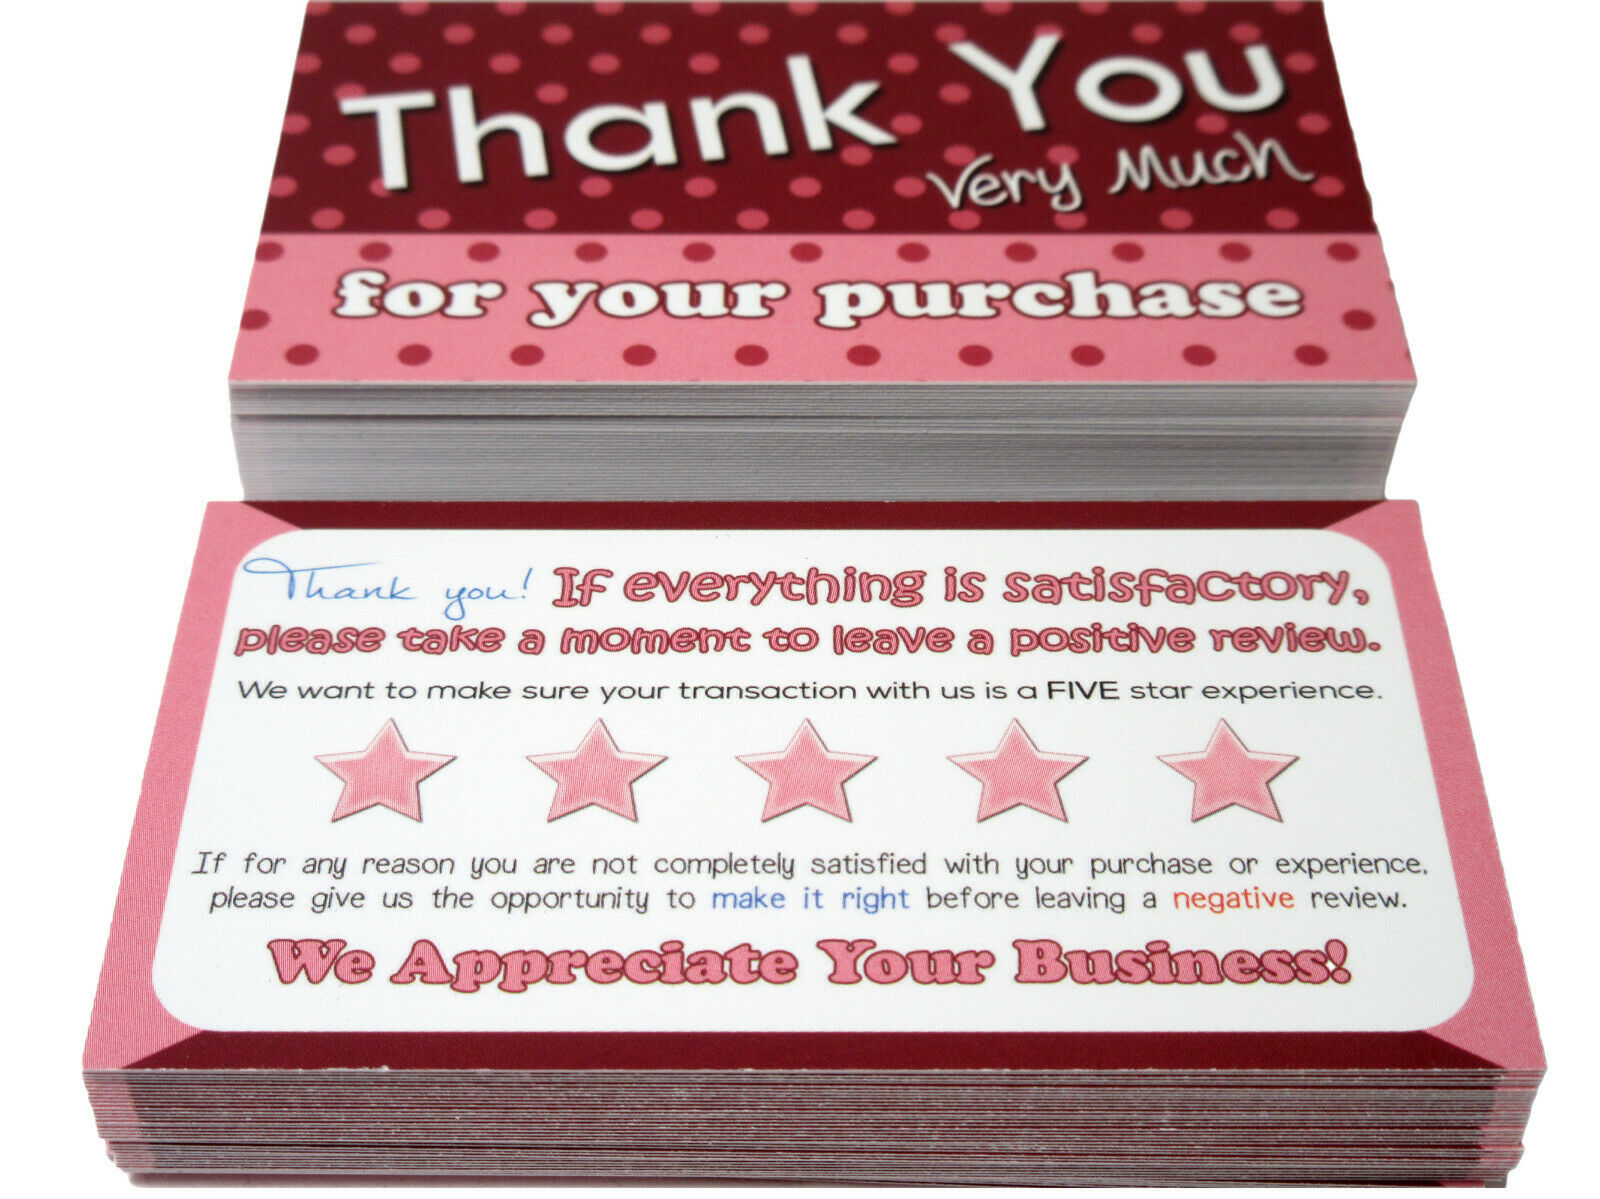 100 Pink Thank You Cards For Poshmark, Mercari, Ebay, Amazon, Or Etsy Sellers